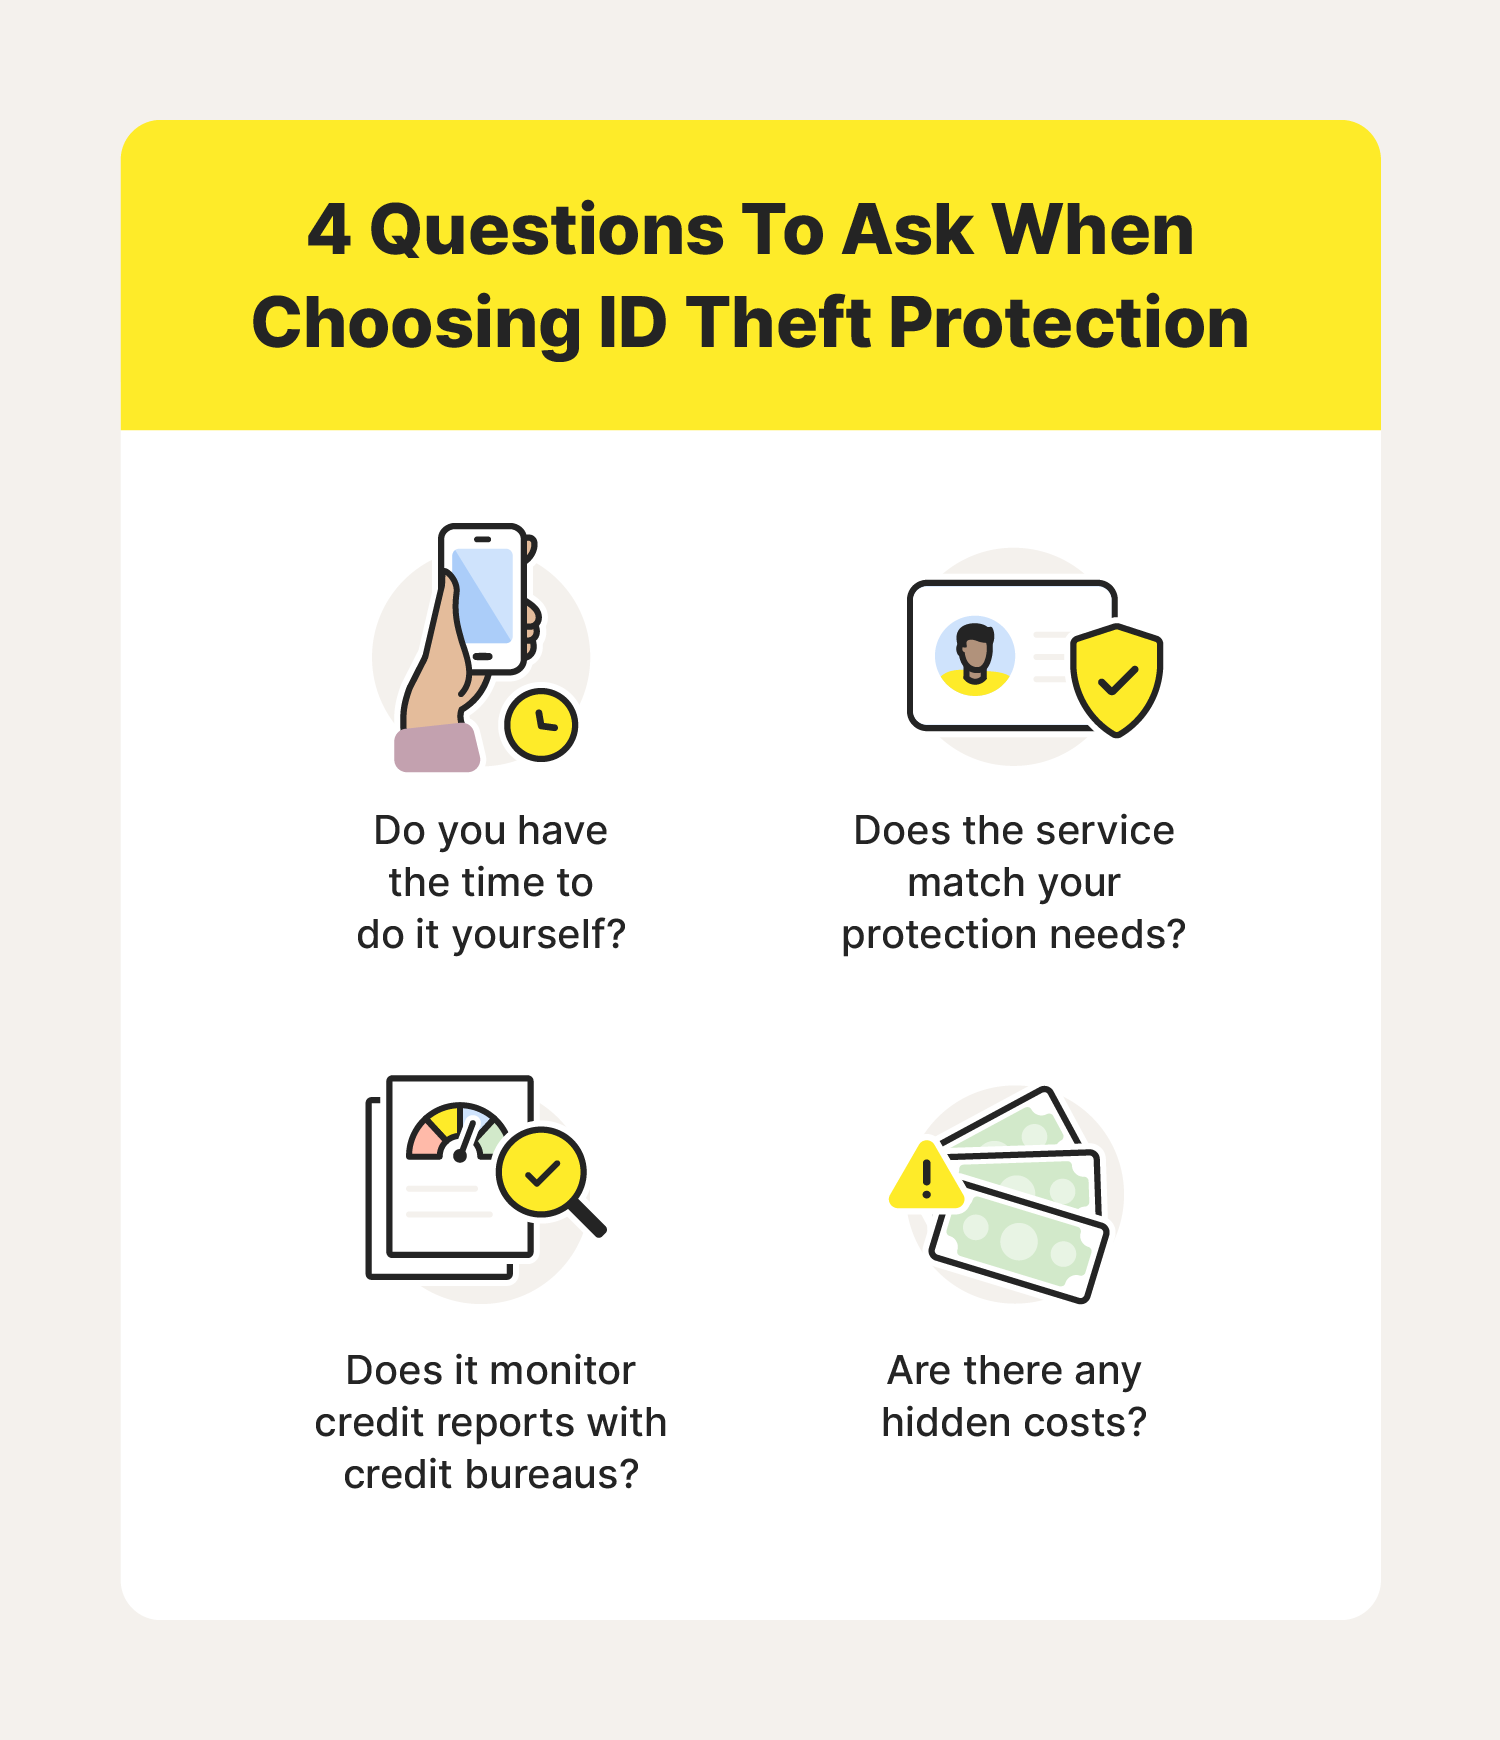 A graphic lists four questions to ask yourself when choosing identity theft protection, helping answer the question, "Is identity theft protection worth it?"